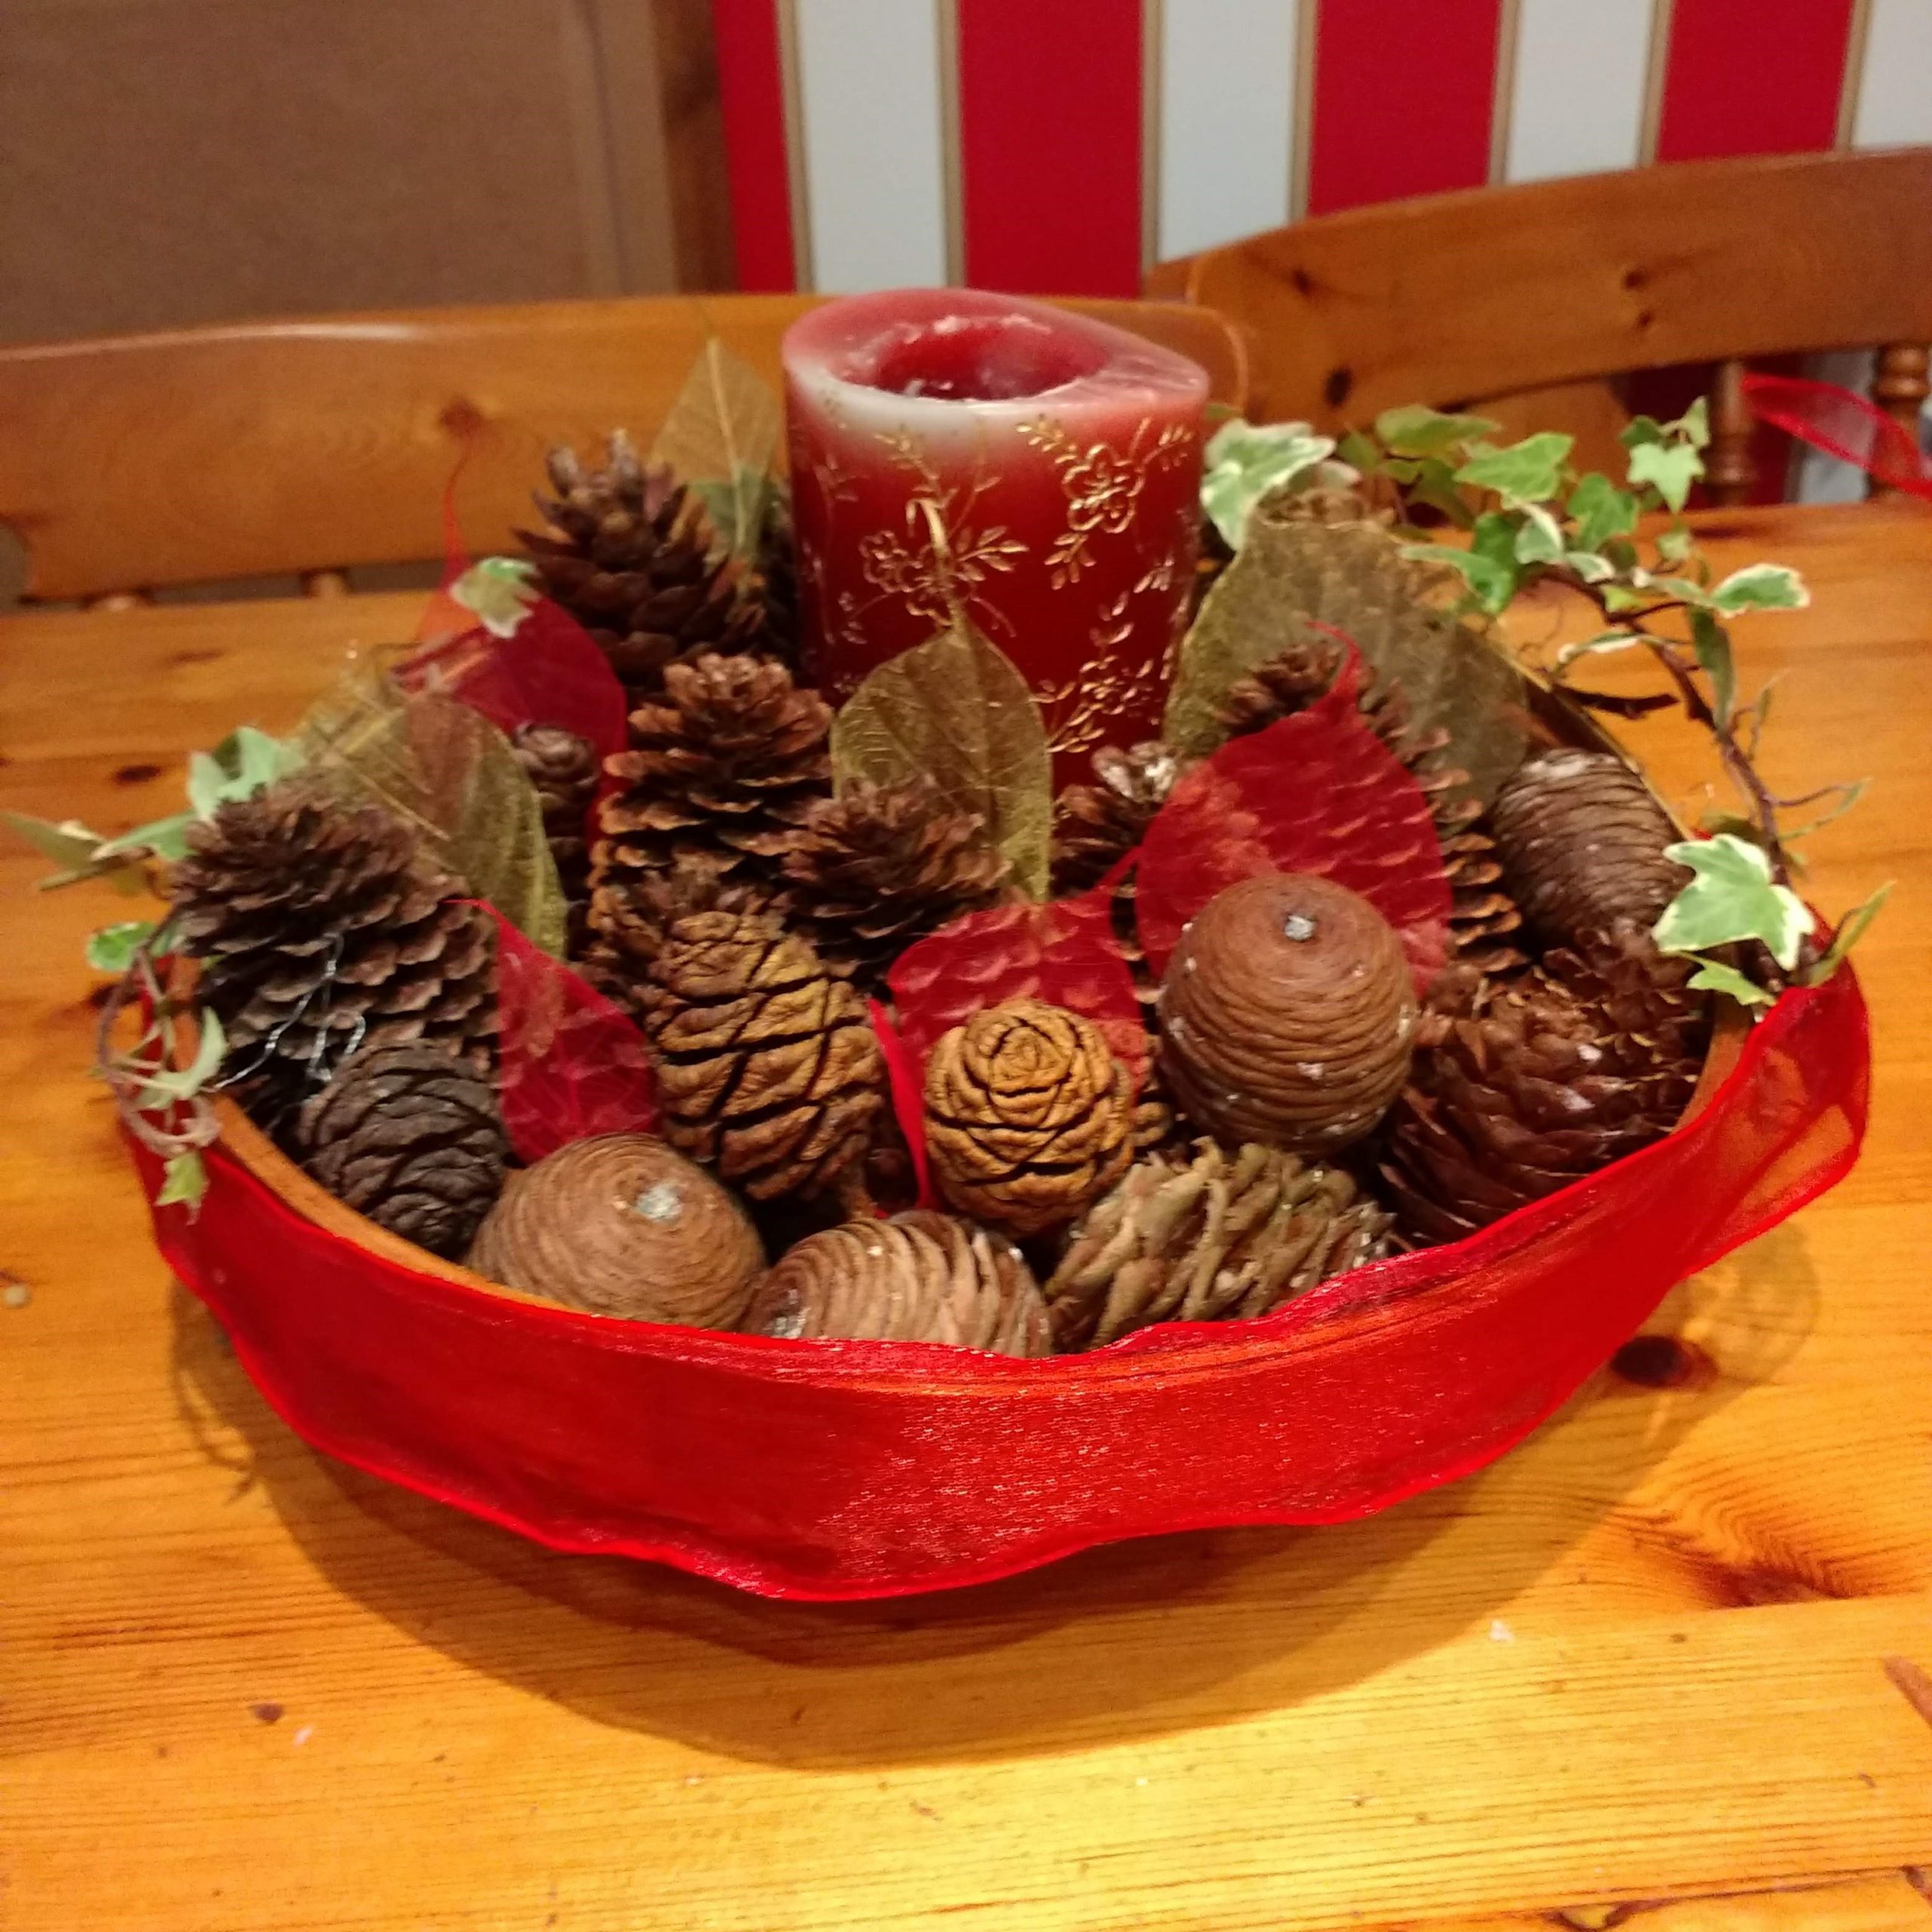 Finished Christmas centrepiece